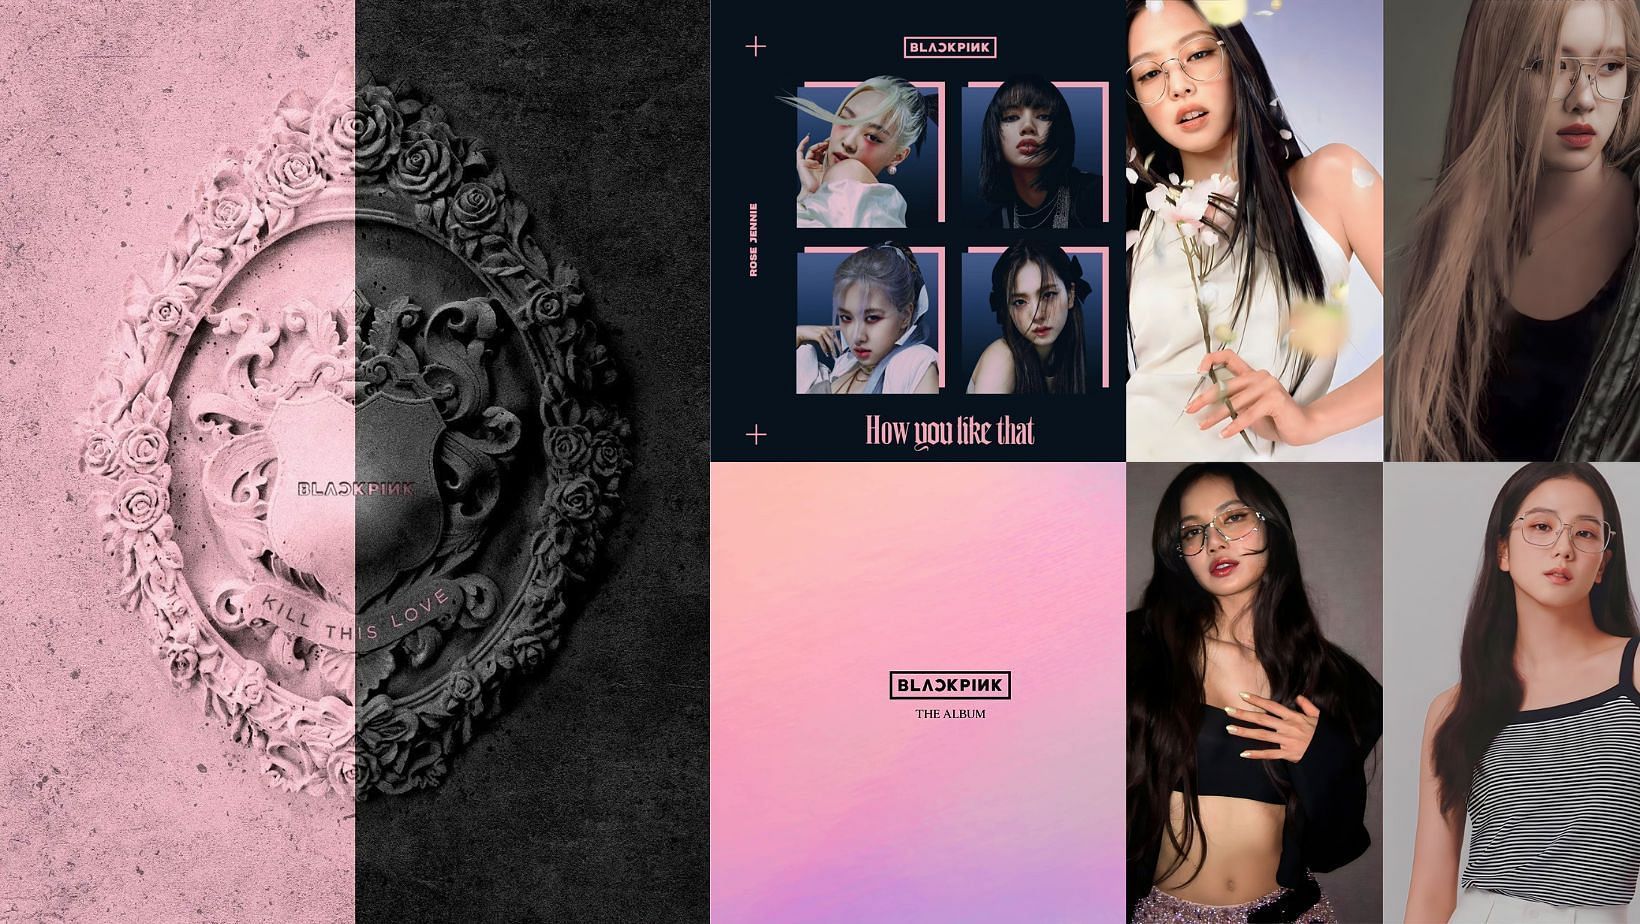 BLACKPINK albums over the years (Images via @BLACKPINK and @bornBlink4BP)